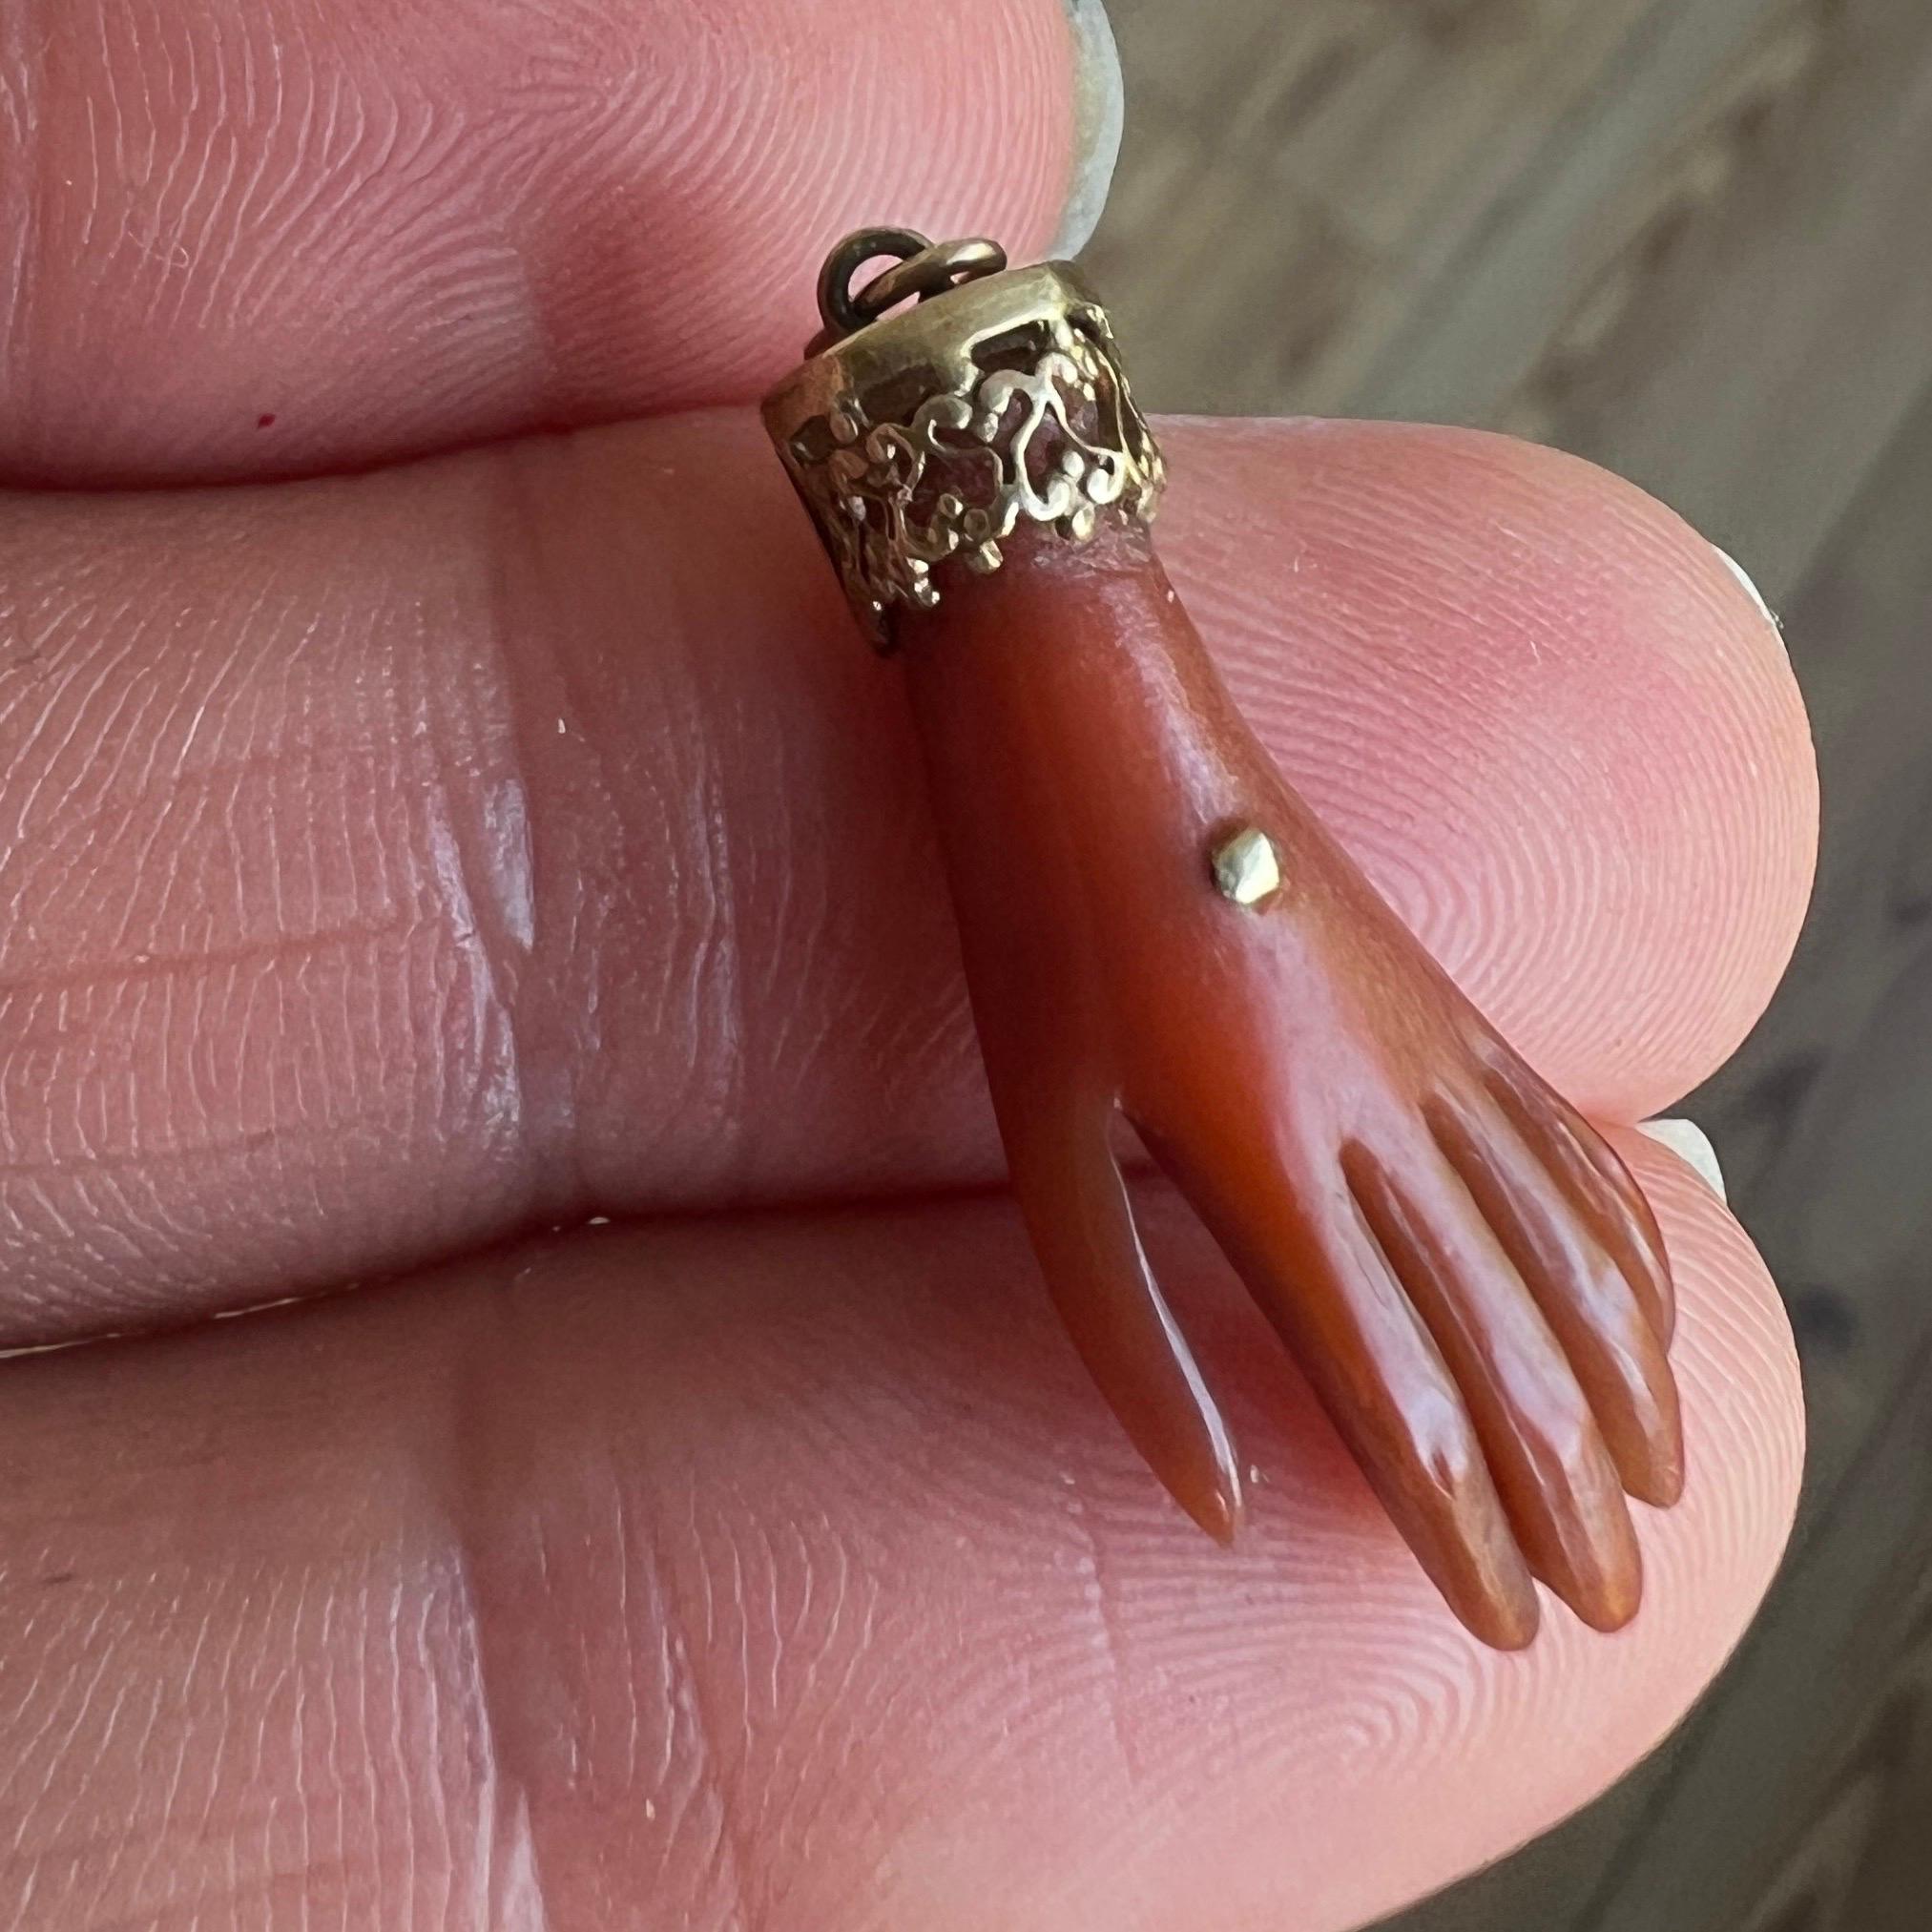 A vintage mano figa hand charm pendant set with a beautiful openwork 9 karat gold bail. The hand is made from brown reddish synthetic plastic and nicely detailed with the filigree work cap. It is a rare find, we have never come across this type of